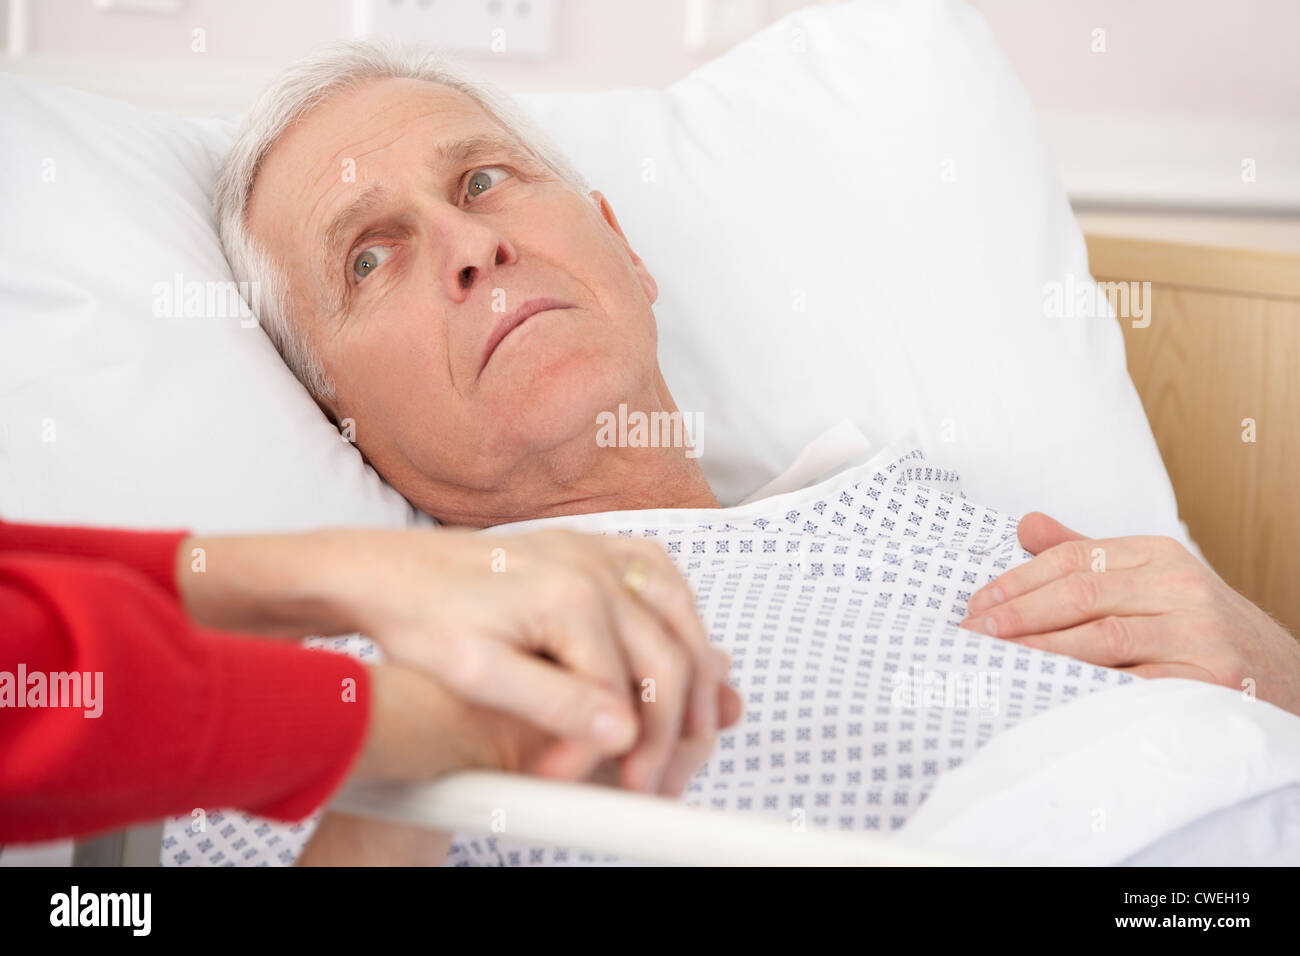 Senior man in hospital bed holding wife's hand Stock Photo